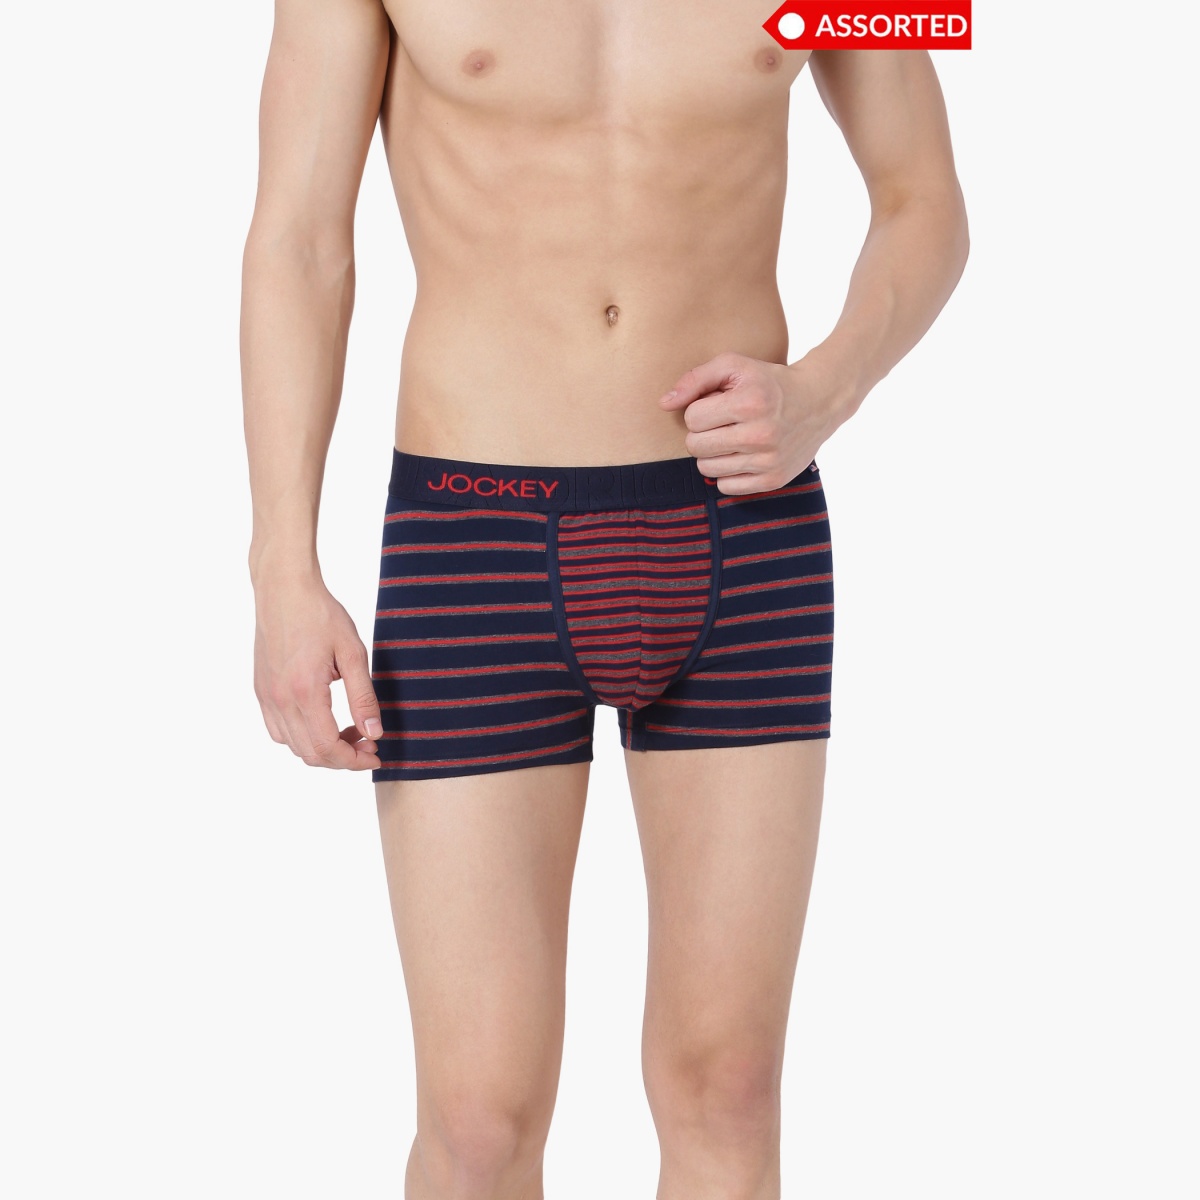 JOCKEY Striped Knitted Trunk - Assorted Colour & Design